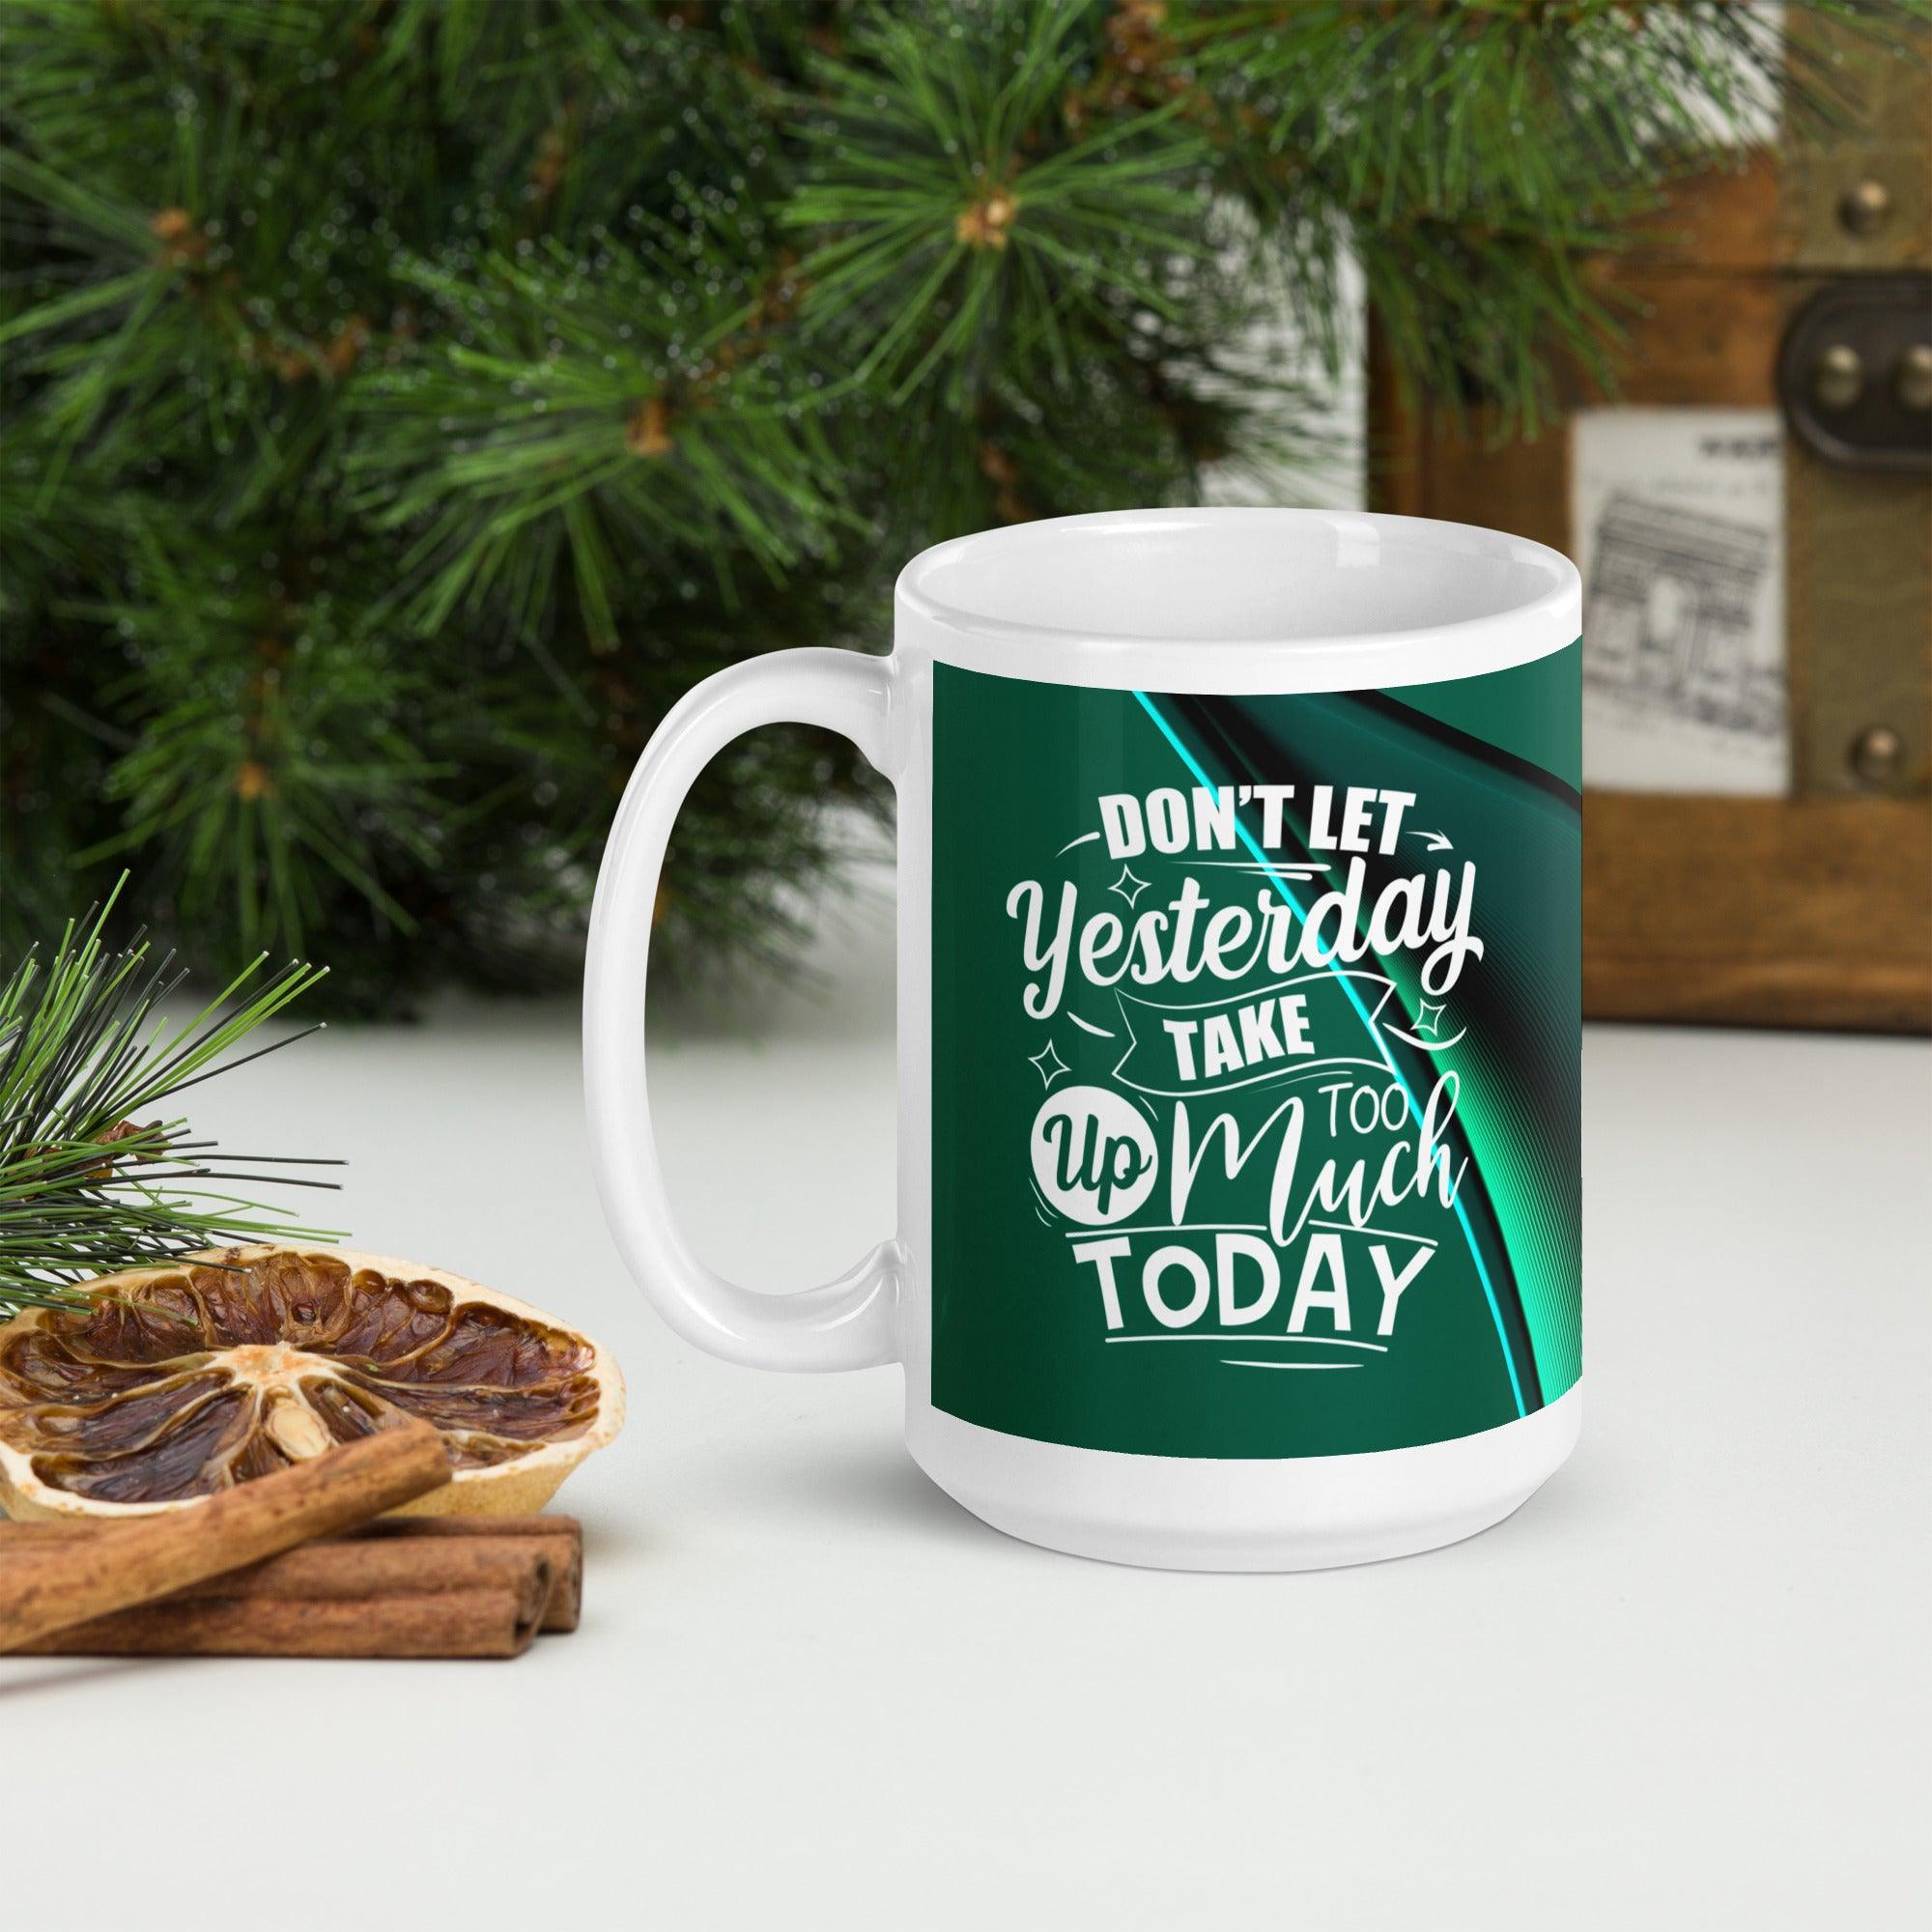 Don't Let Yesterday Take Too Much Today | White glossy mug - Affirm Effect